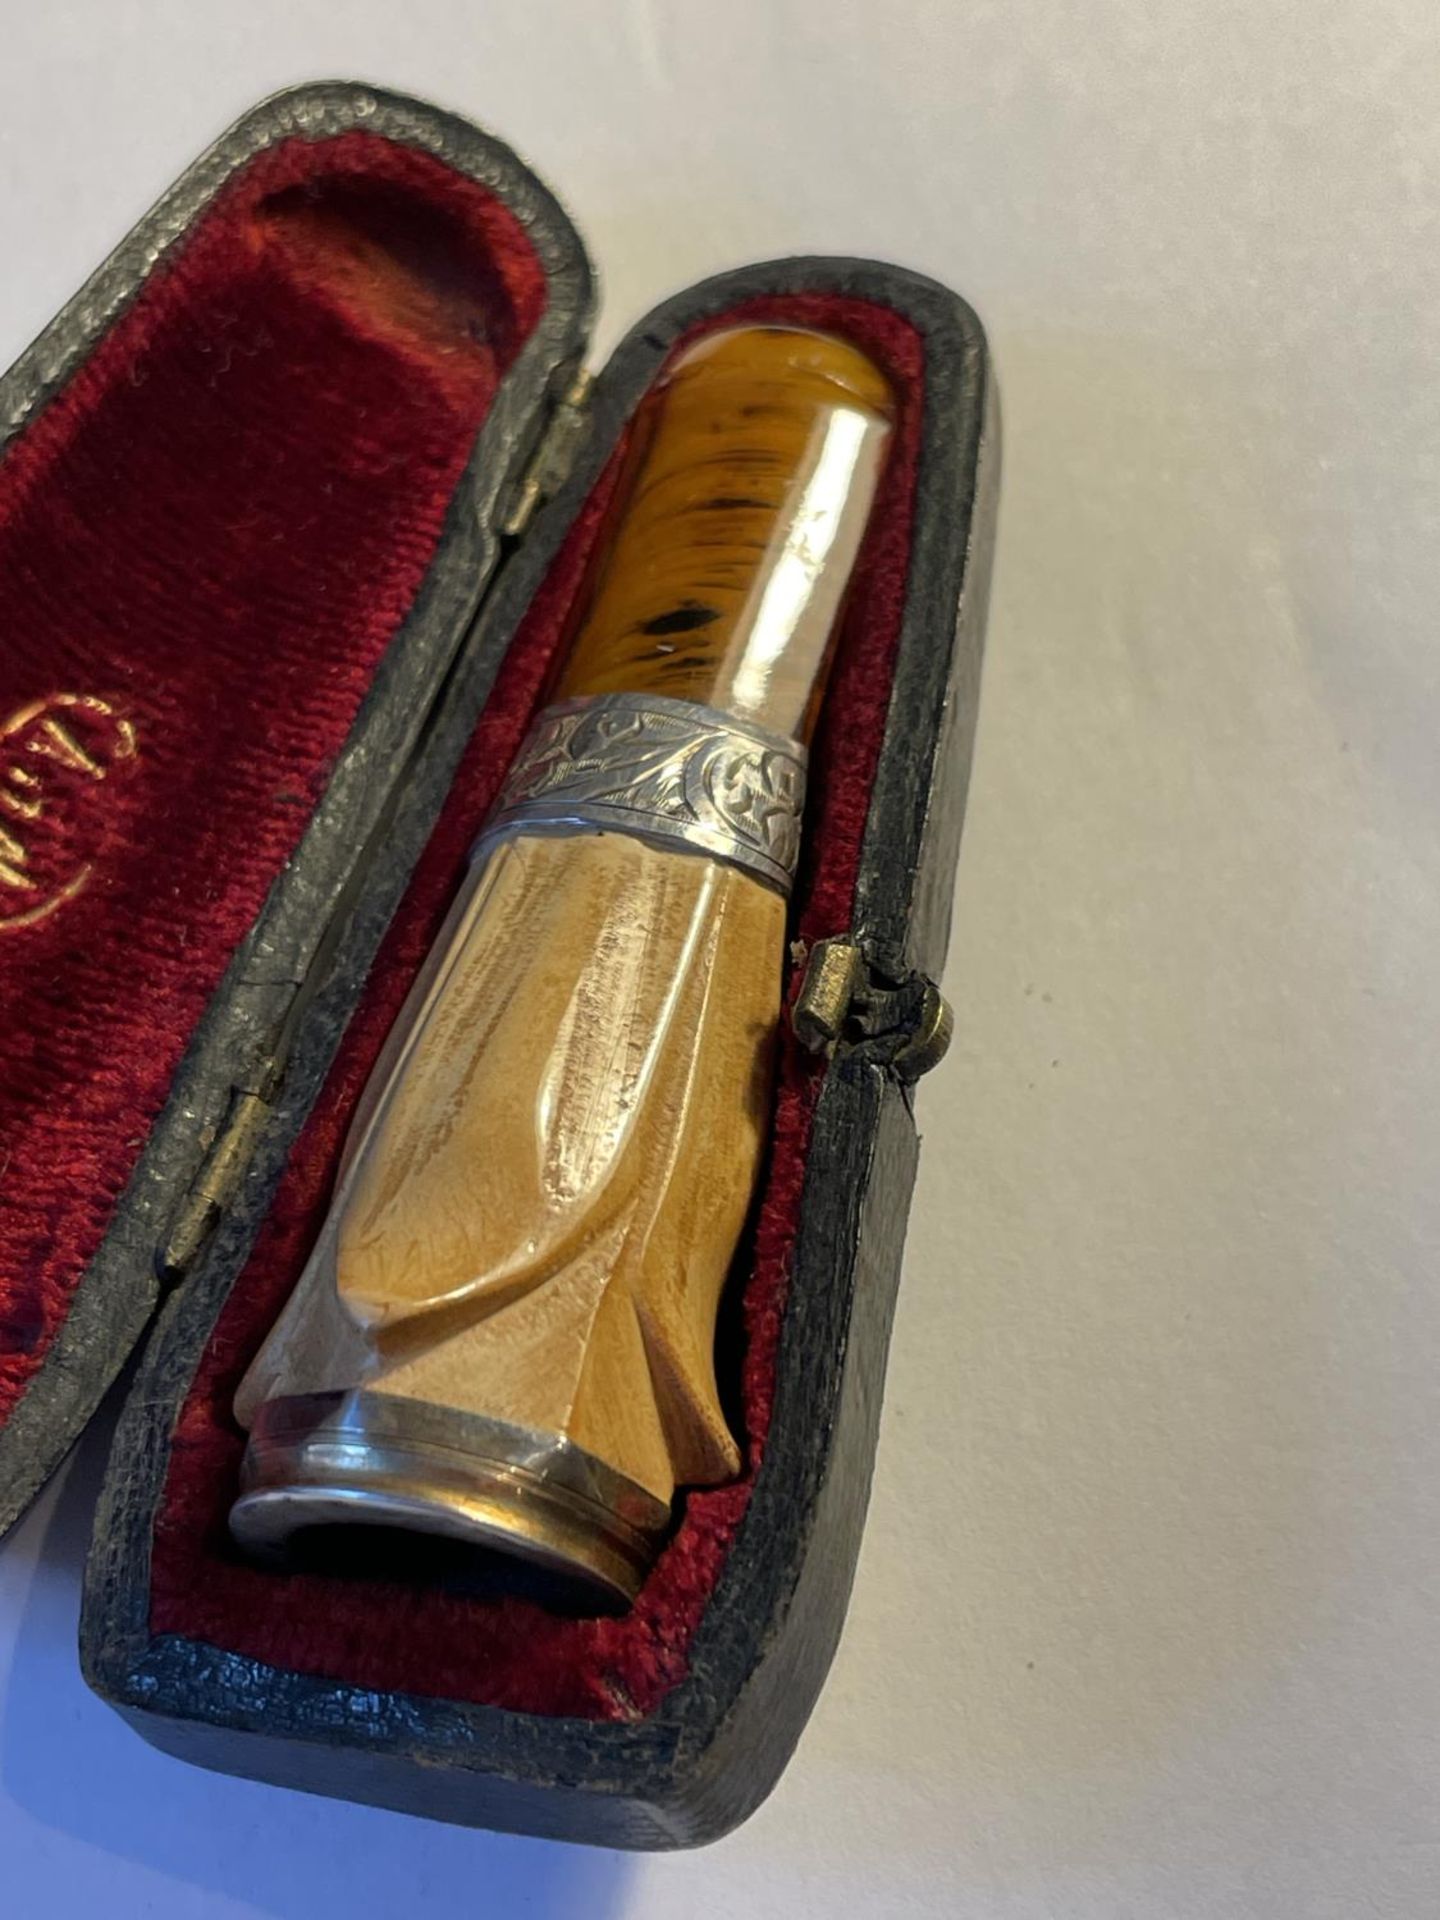 A SILVER AND AMBER CHEROOT HOLDER IN ORIGNAL PRESENTATION CASE - Image 3 of 3